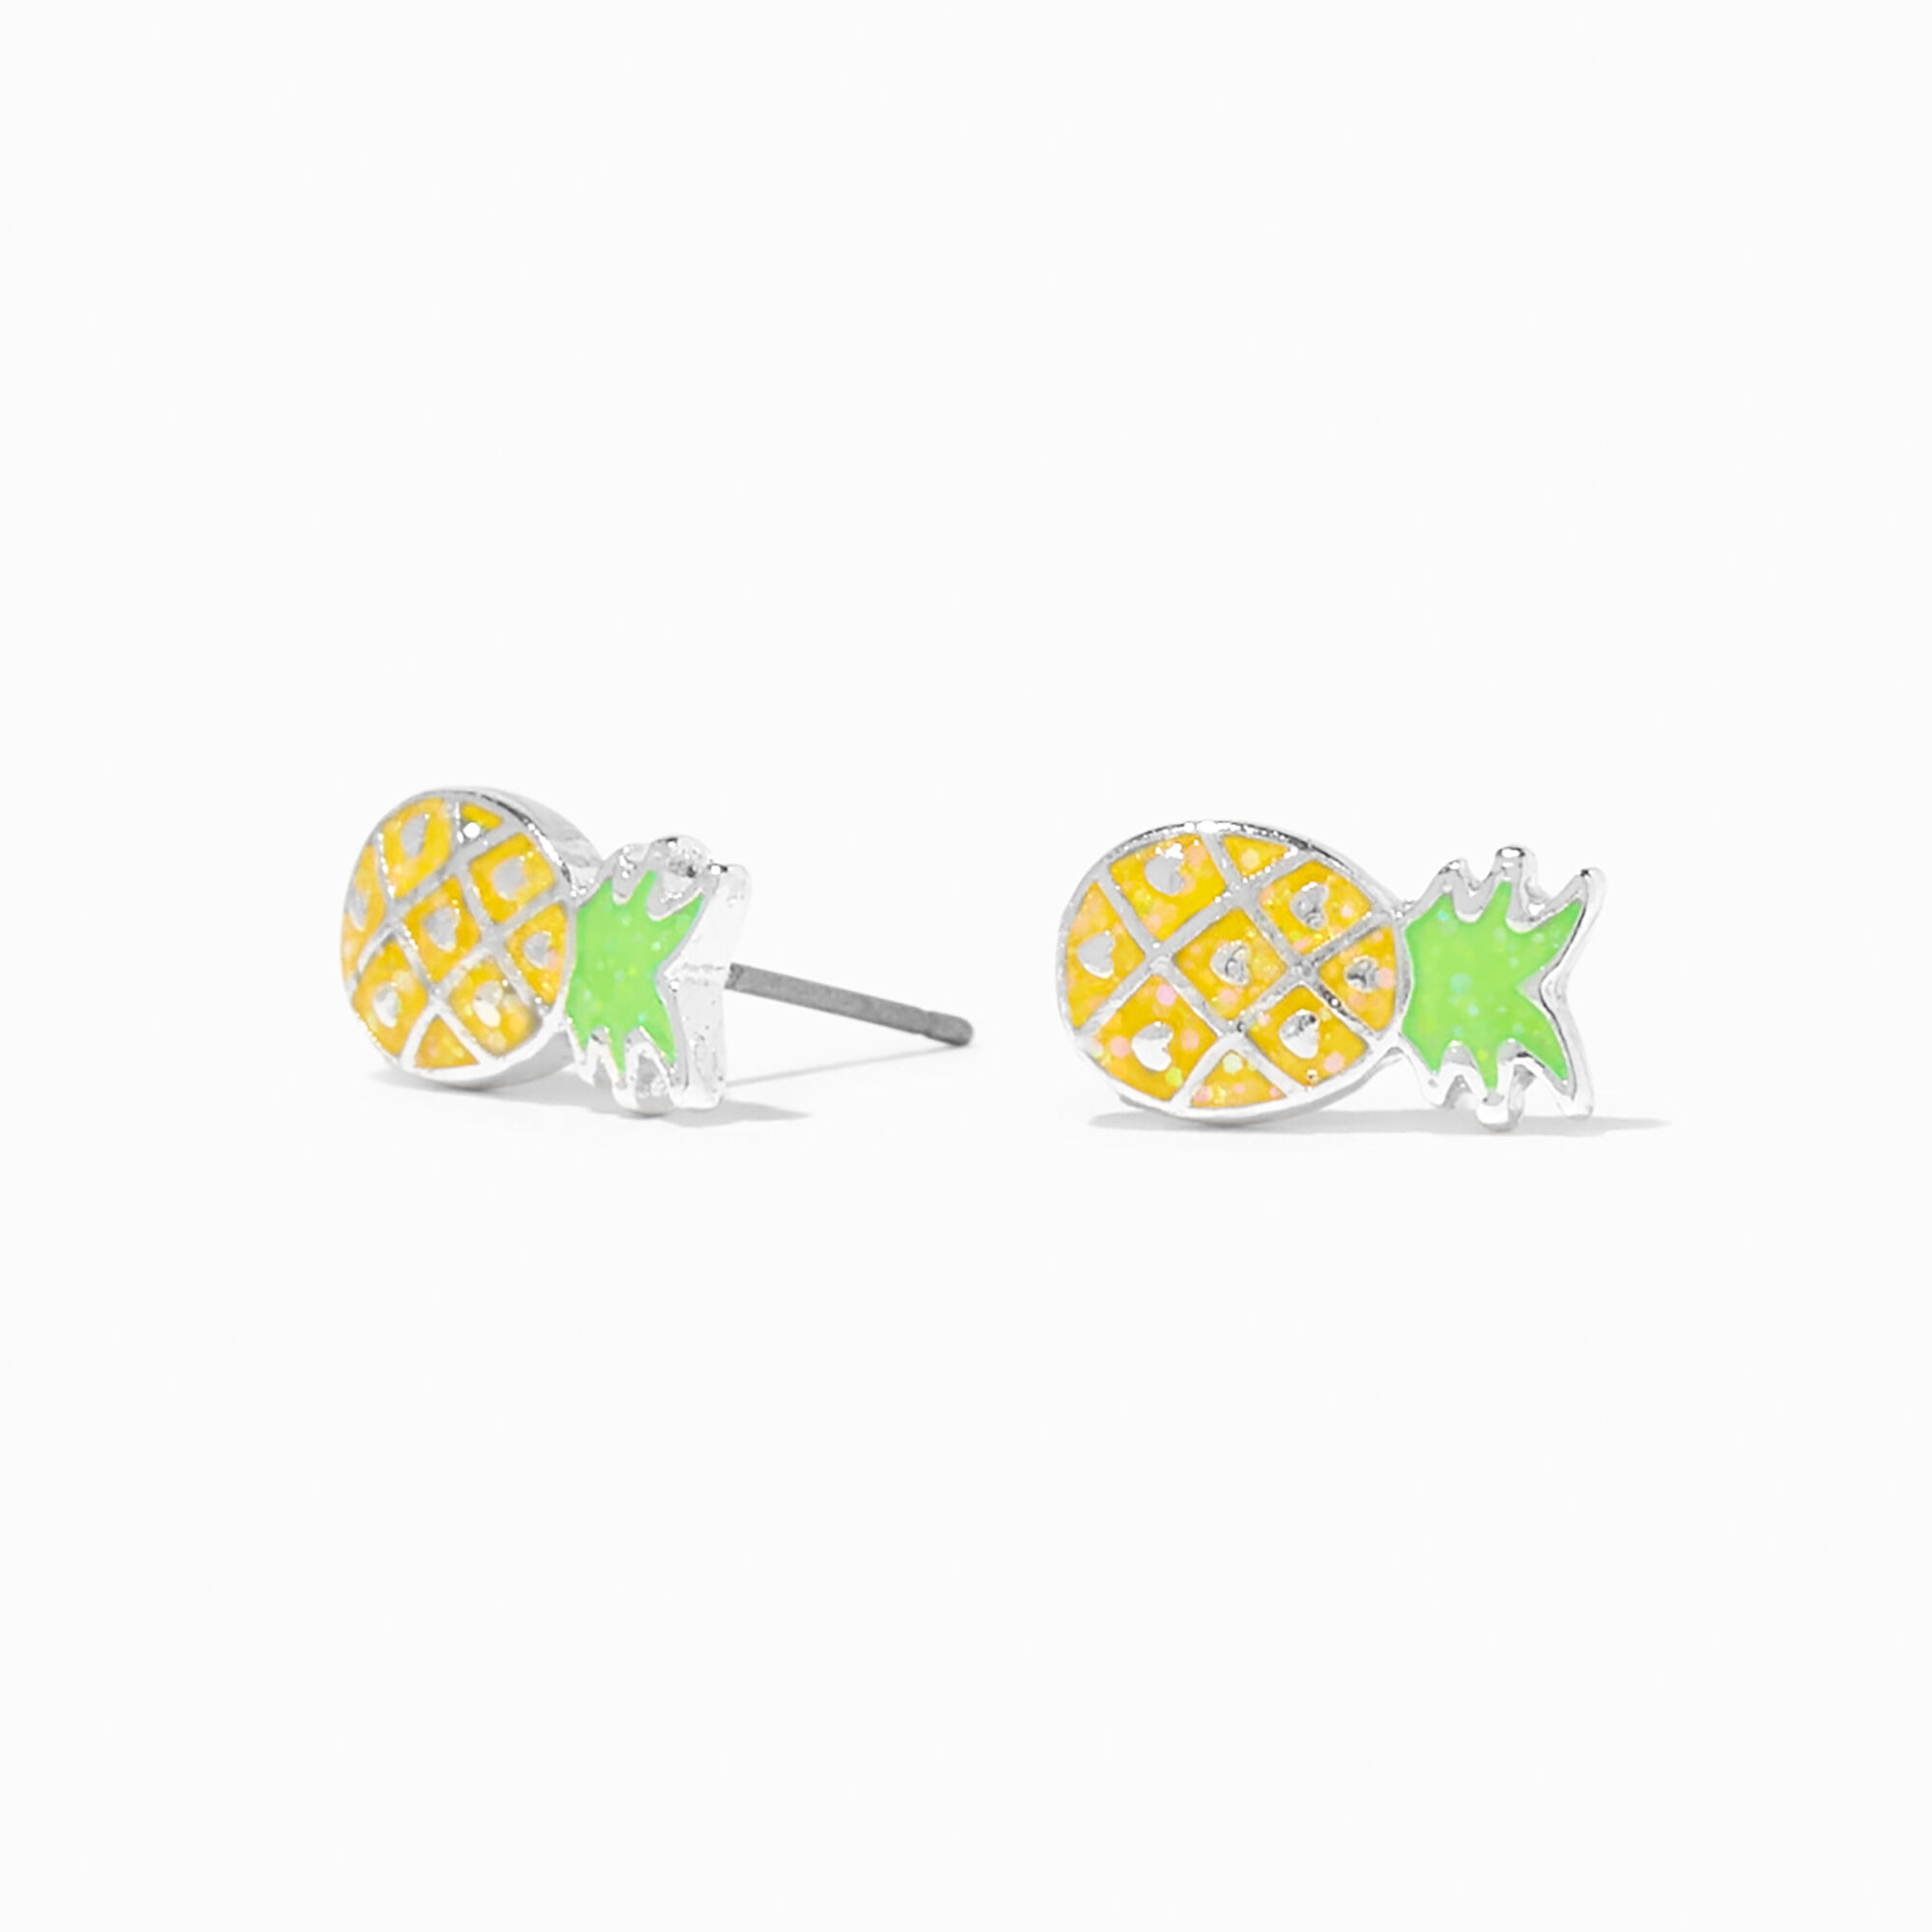 View Claires Glow In The Dark Pineapple Stud Earrings information